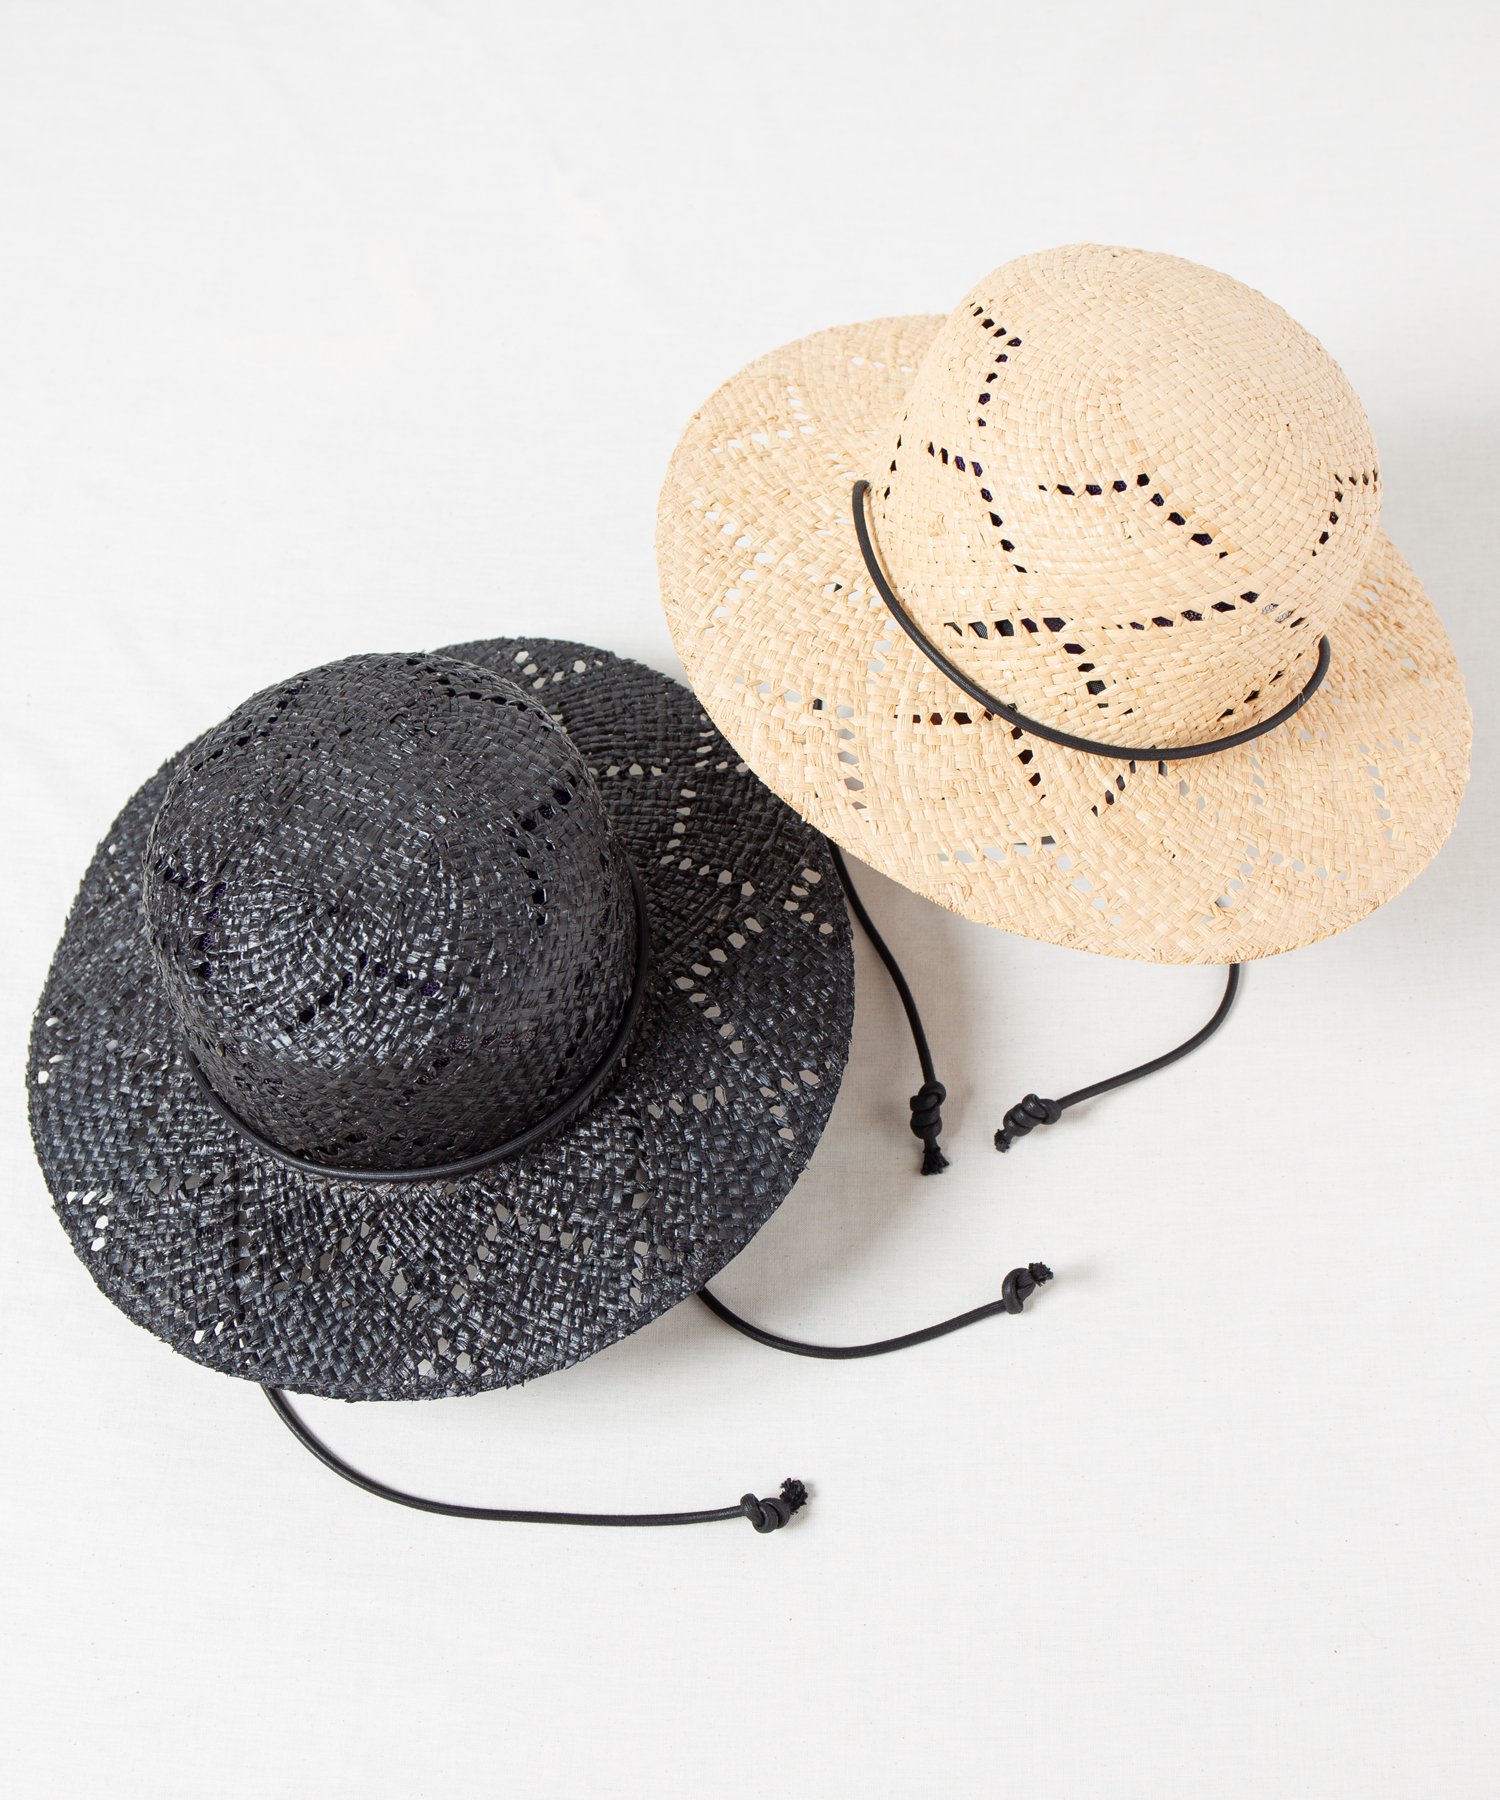 <img class='new_mark_img1' src='https://img.shop-pro.jp/img/new/icons20.gif' style='border:none;display:inline;margin:0px;padding:0px;width:auto;' />【Racal】 Openwork Raffia Hat / レイズストア限定 透かし編みラフィアハット